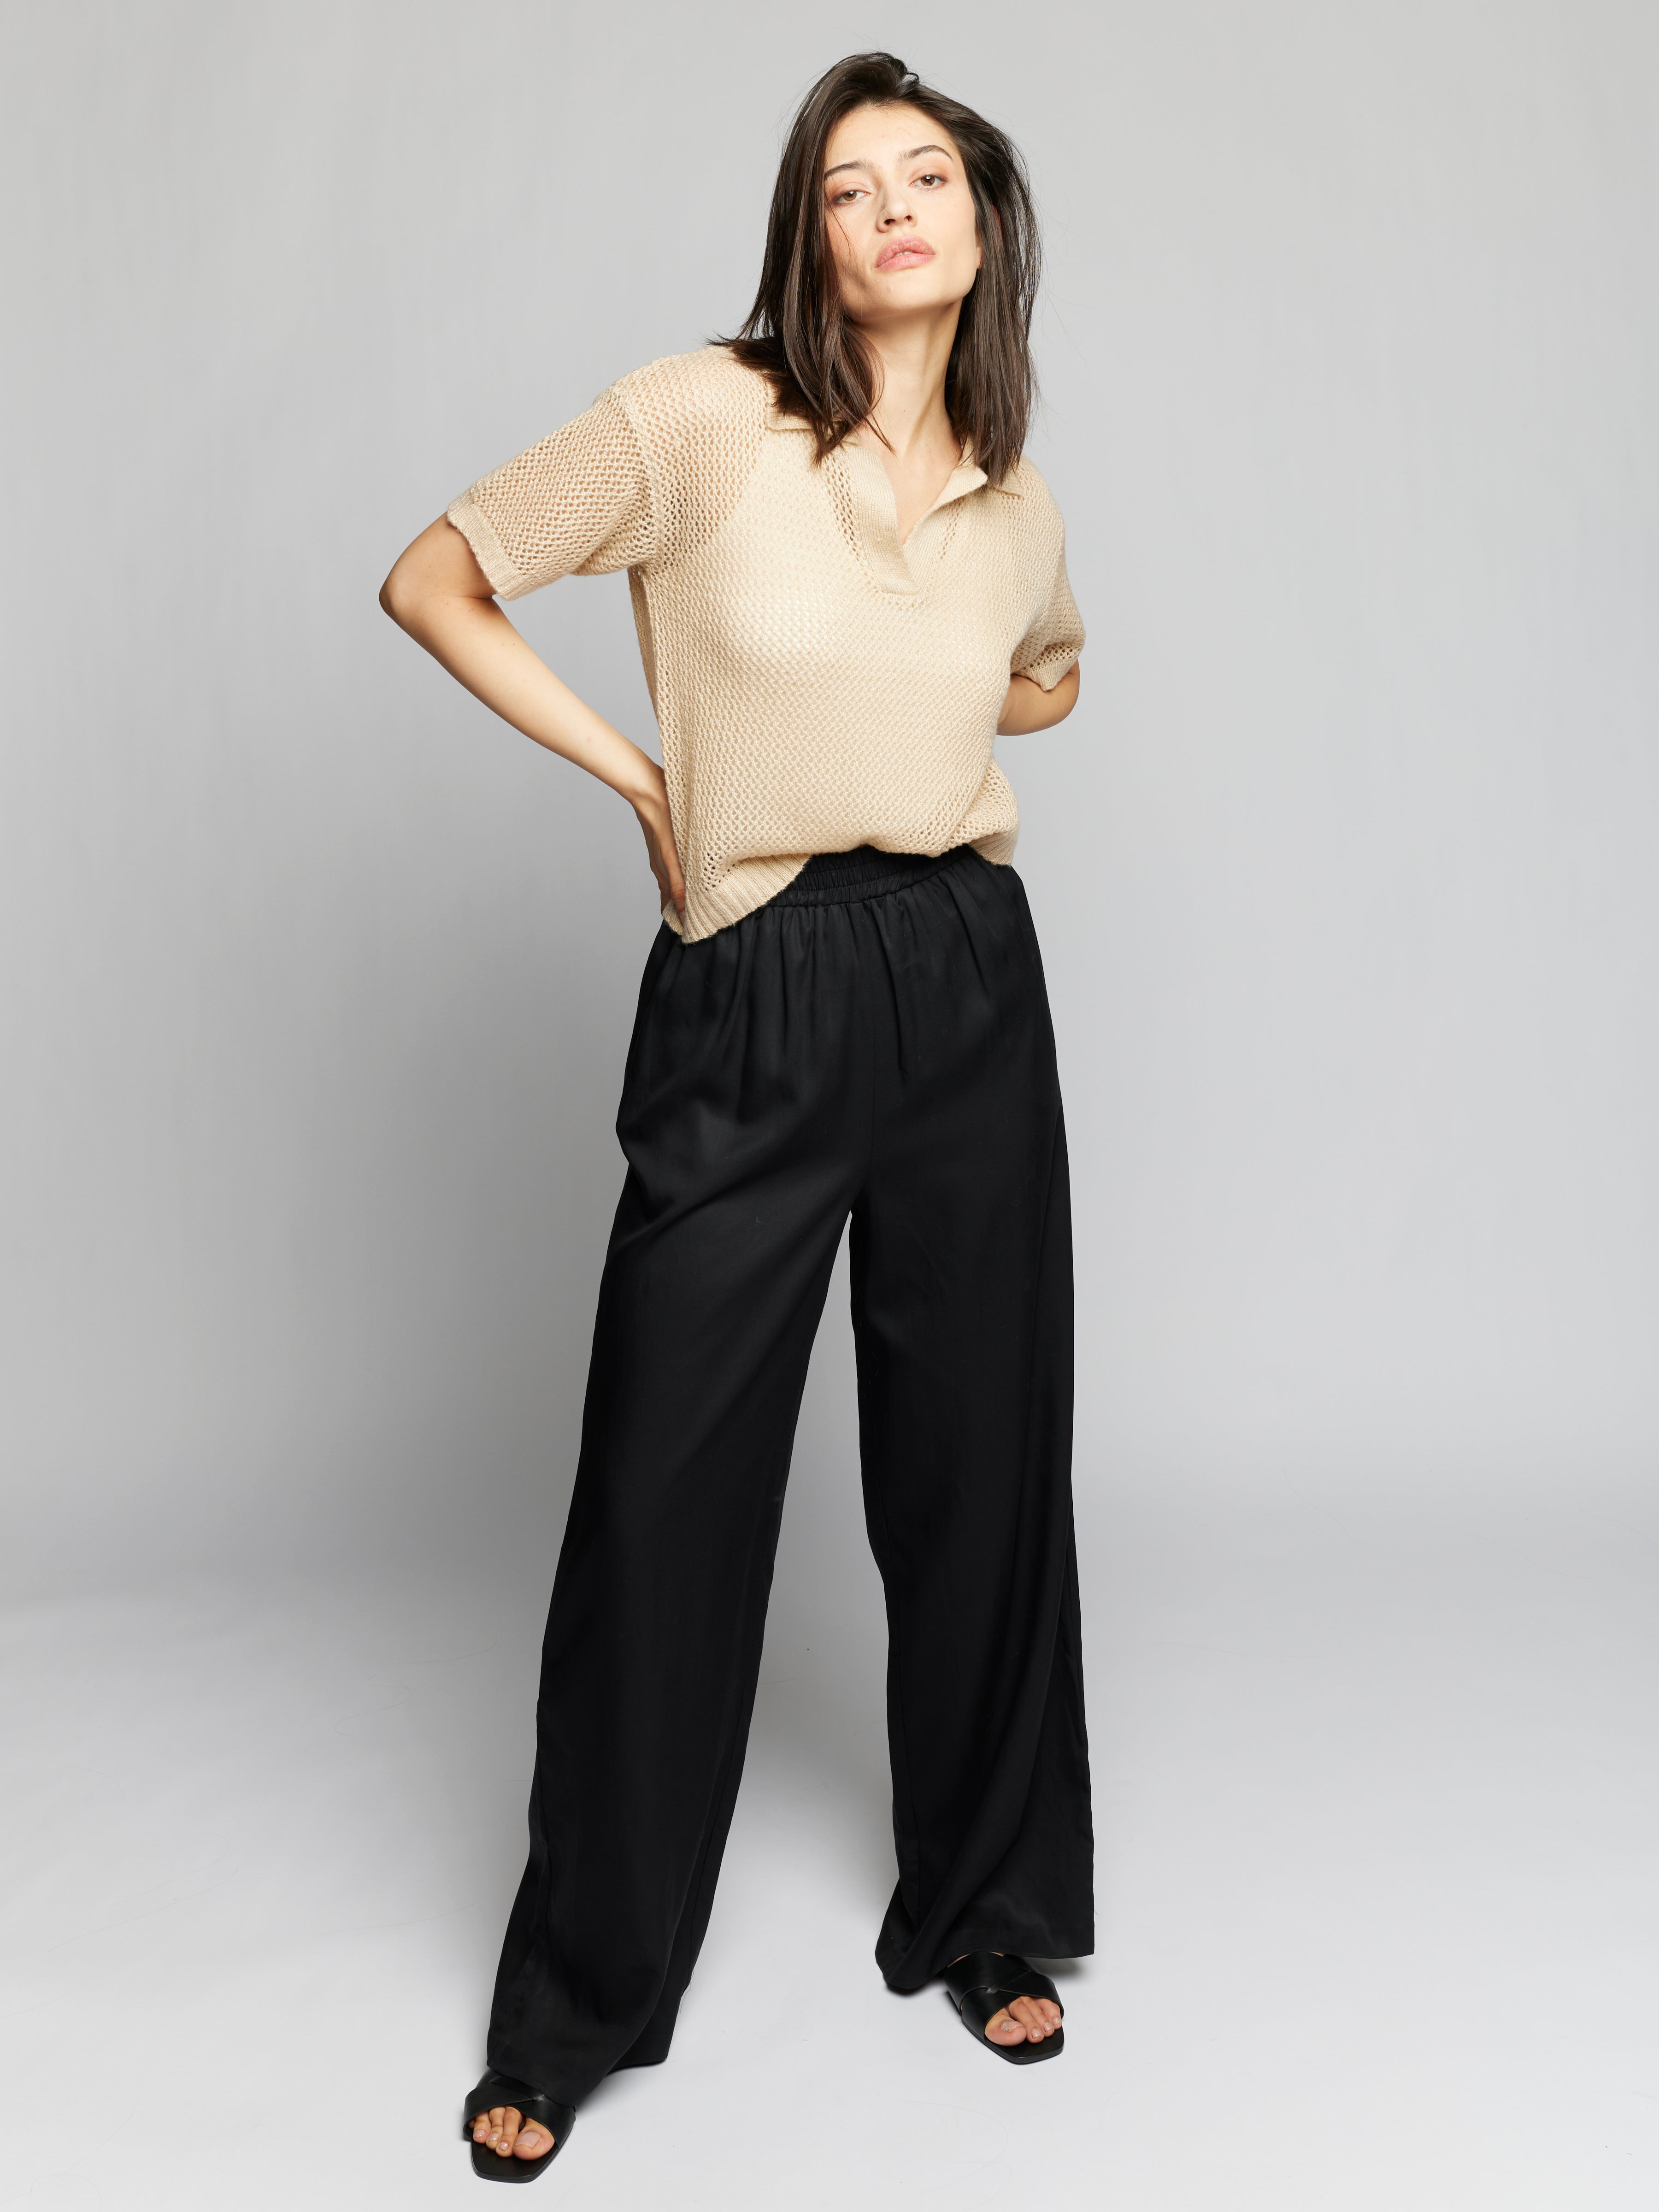 mid-rise wide leg pants with an elasticized waist and easy, relaxed fit in black